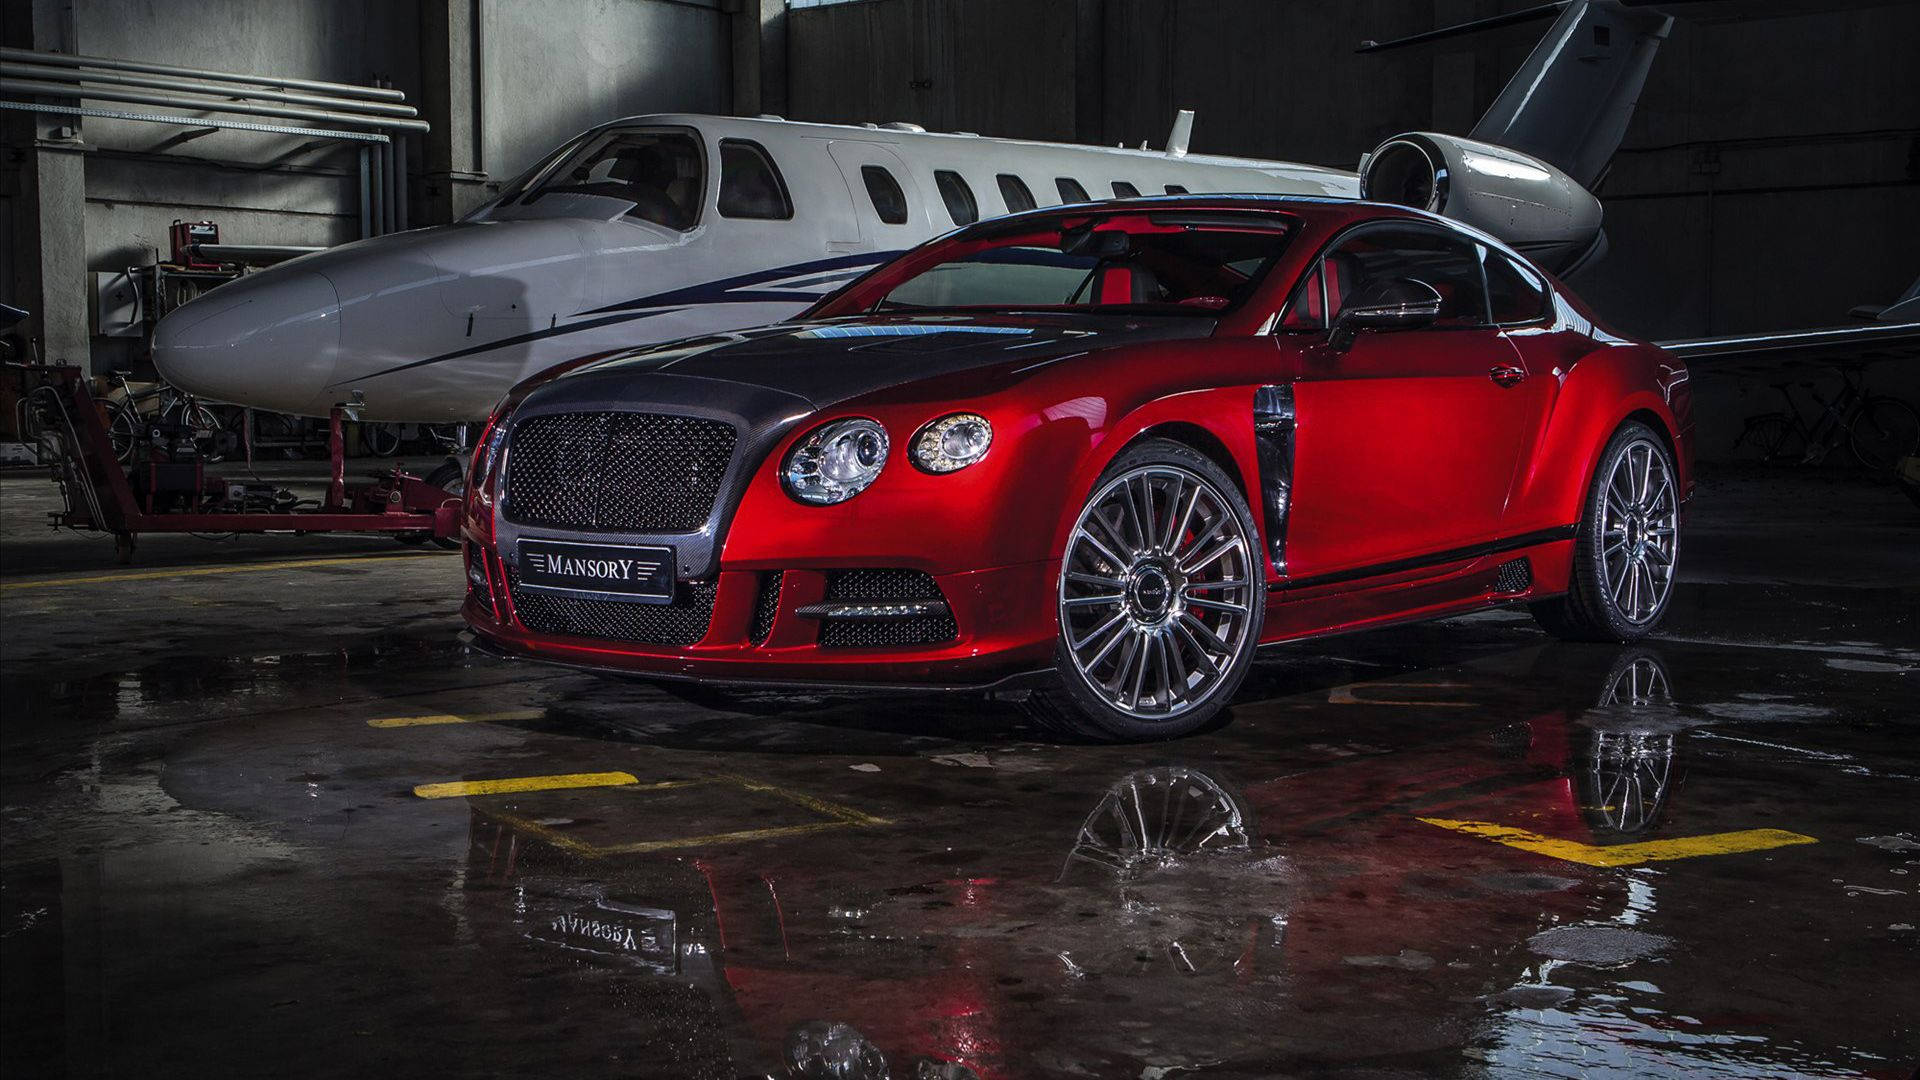 Exquisite Red Mansory Continental Bentley Wallpaper